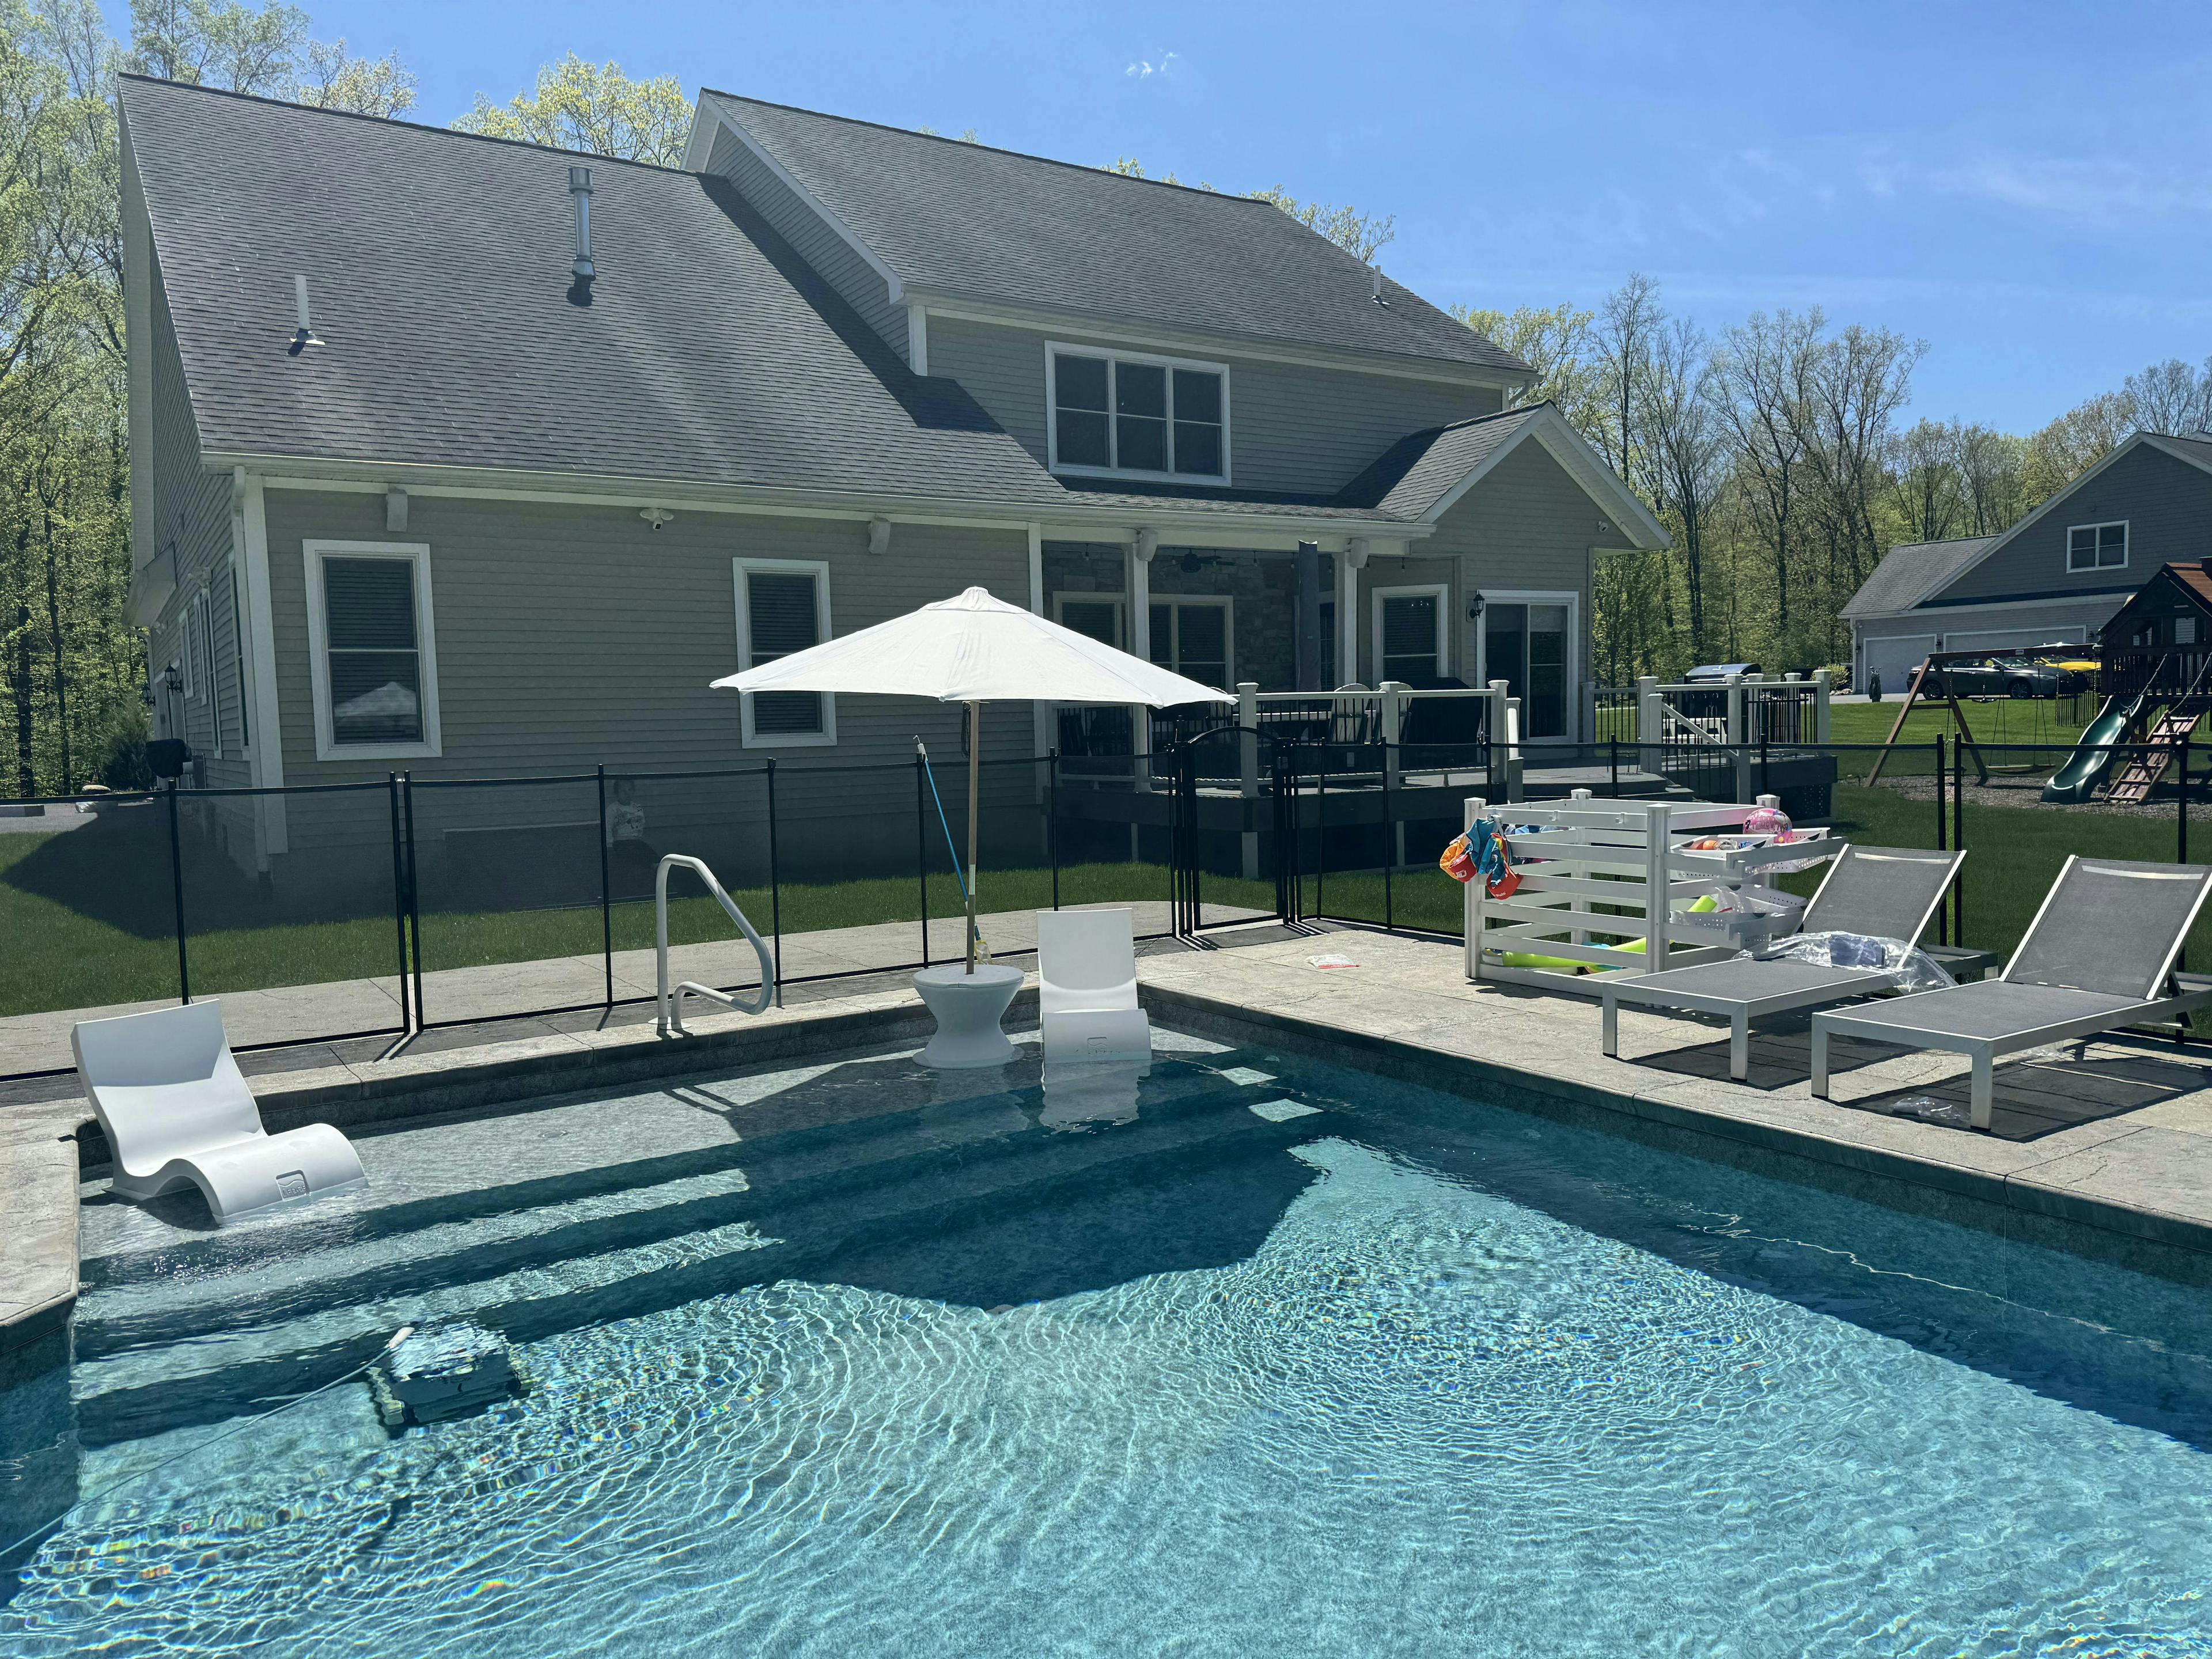 ** New salt water pool ** with access to an amazing secluded backyard!